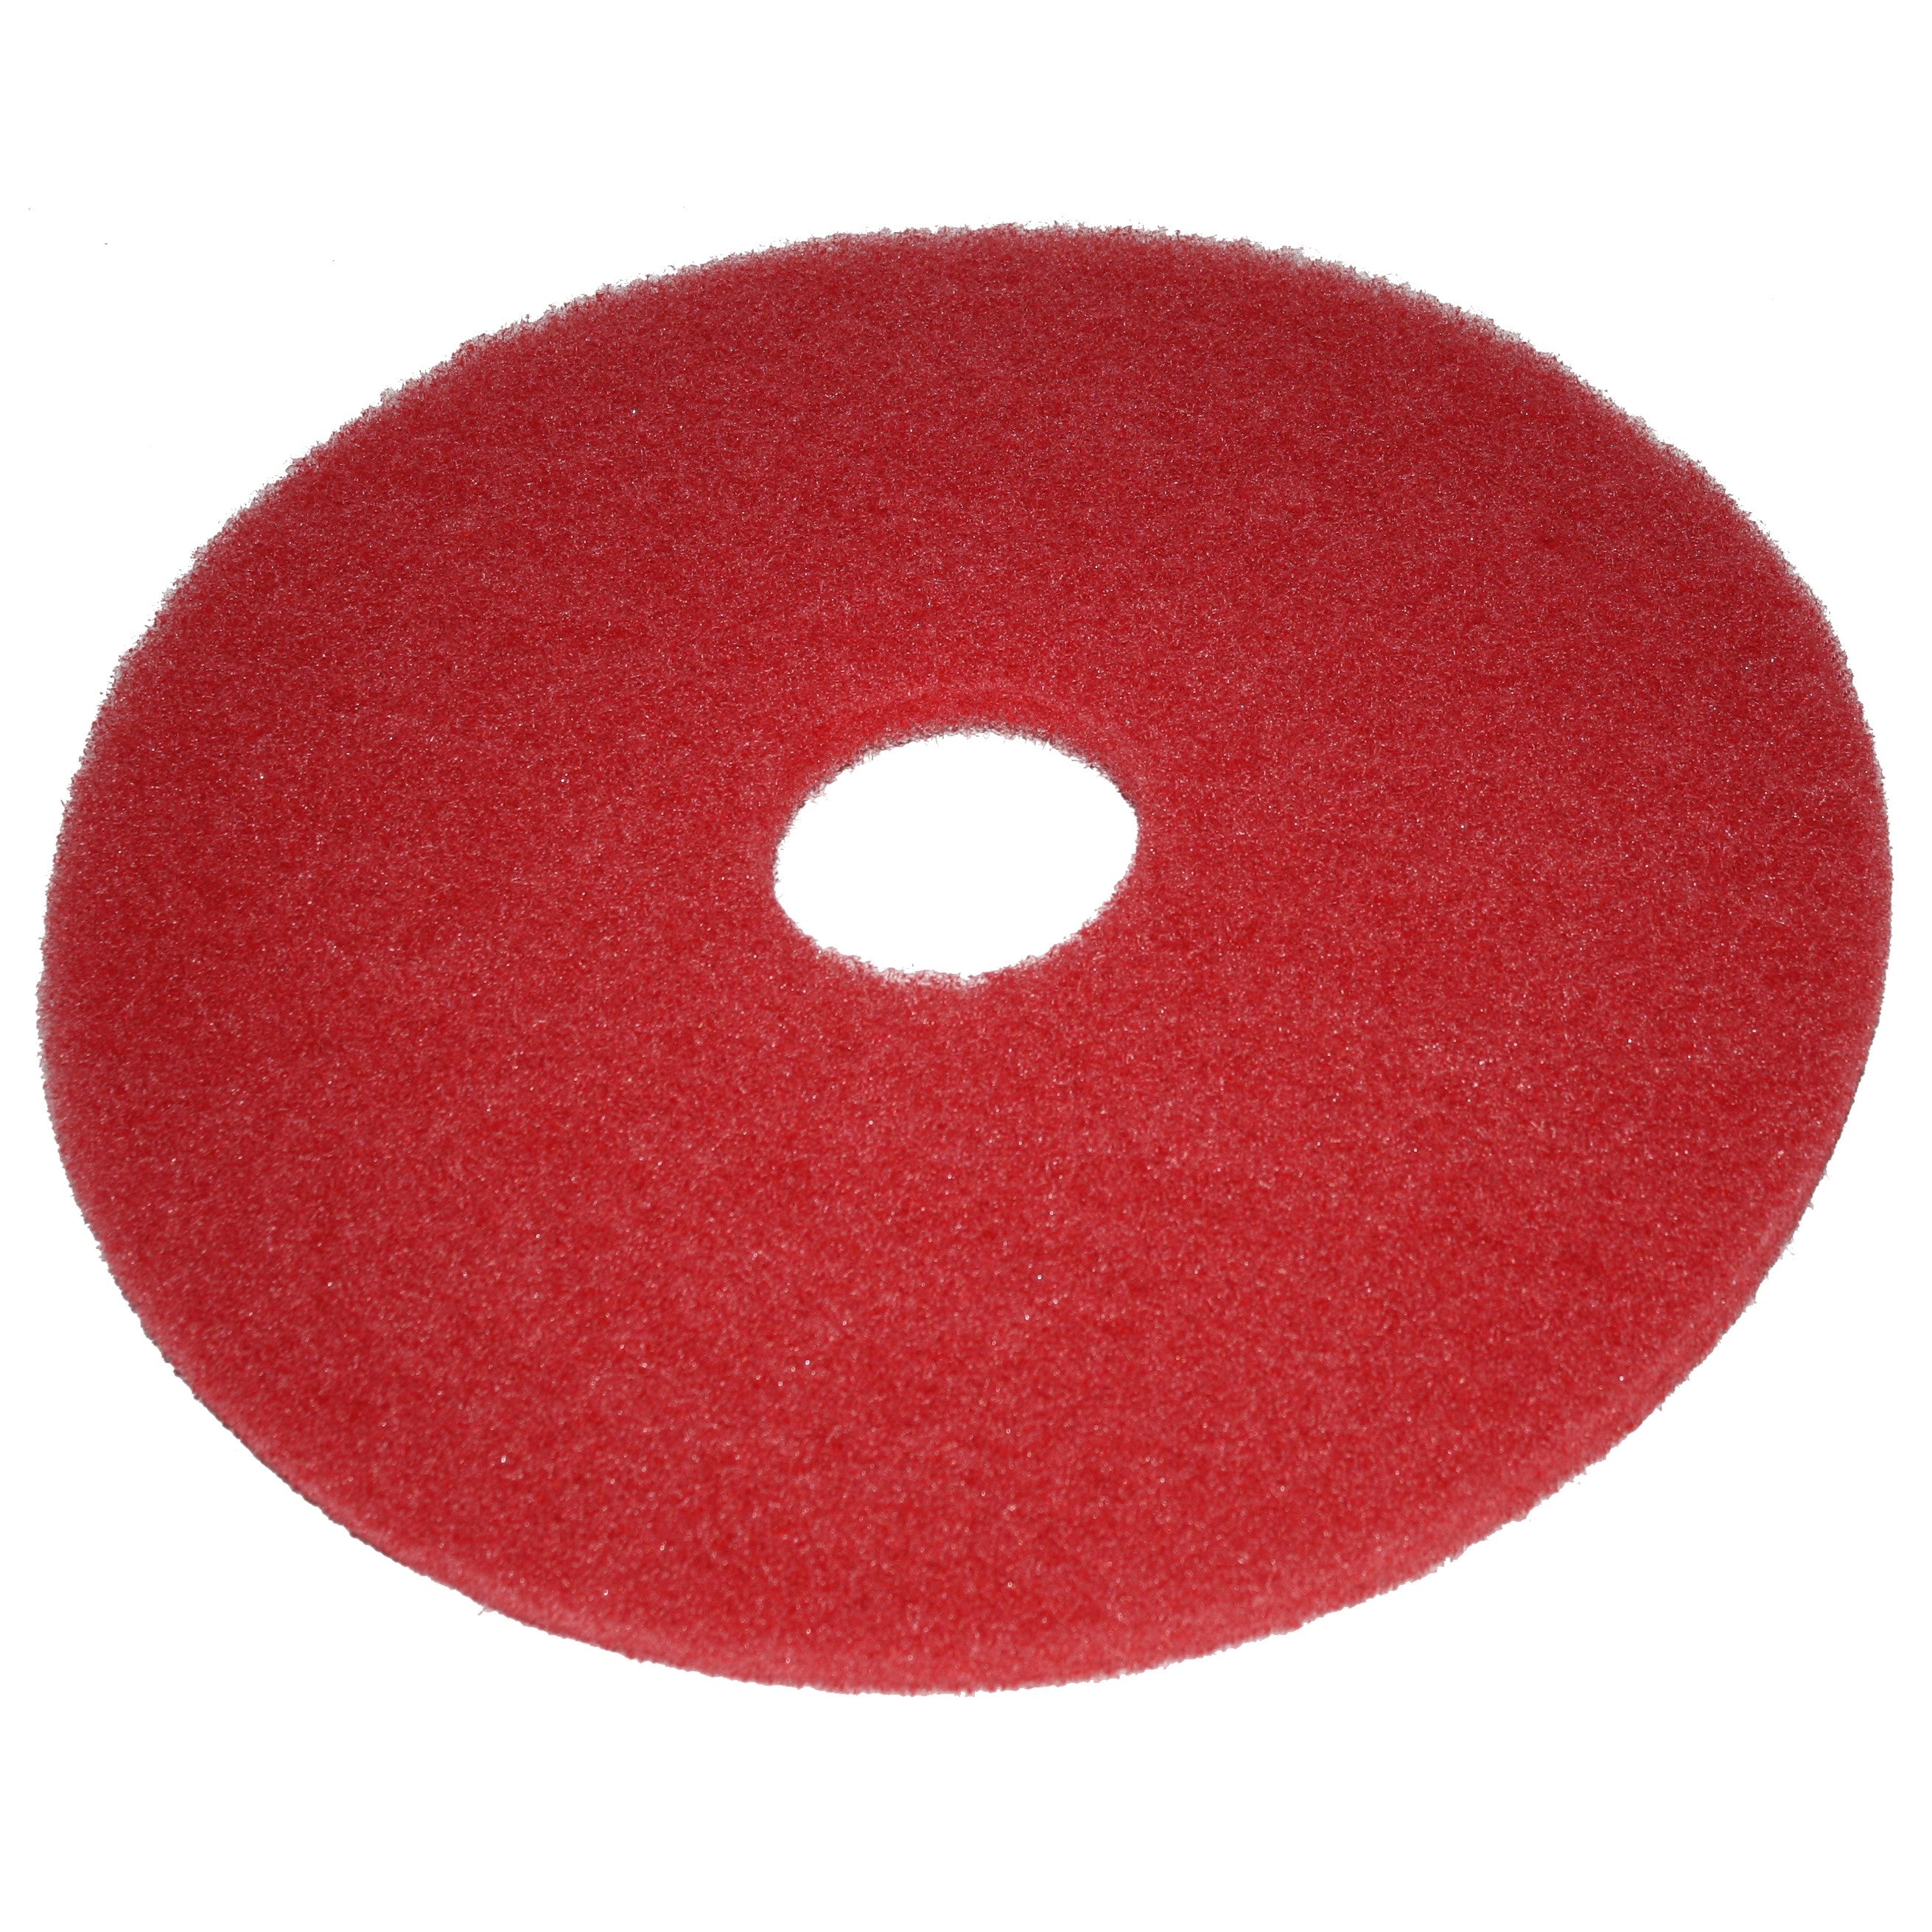 Pad rouge, Ø 165 mm, polyester